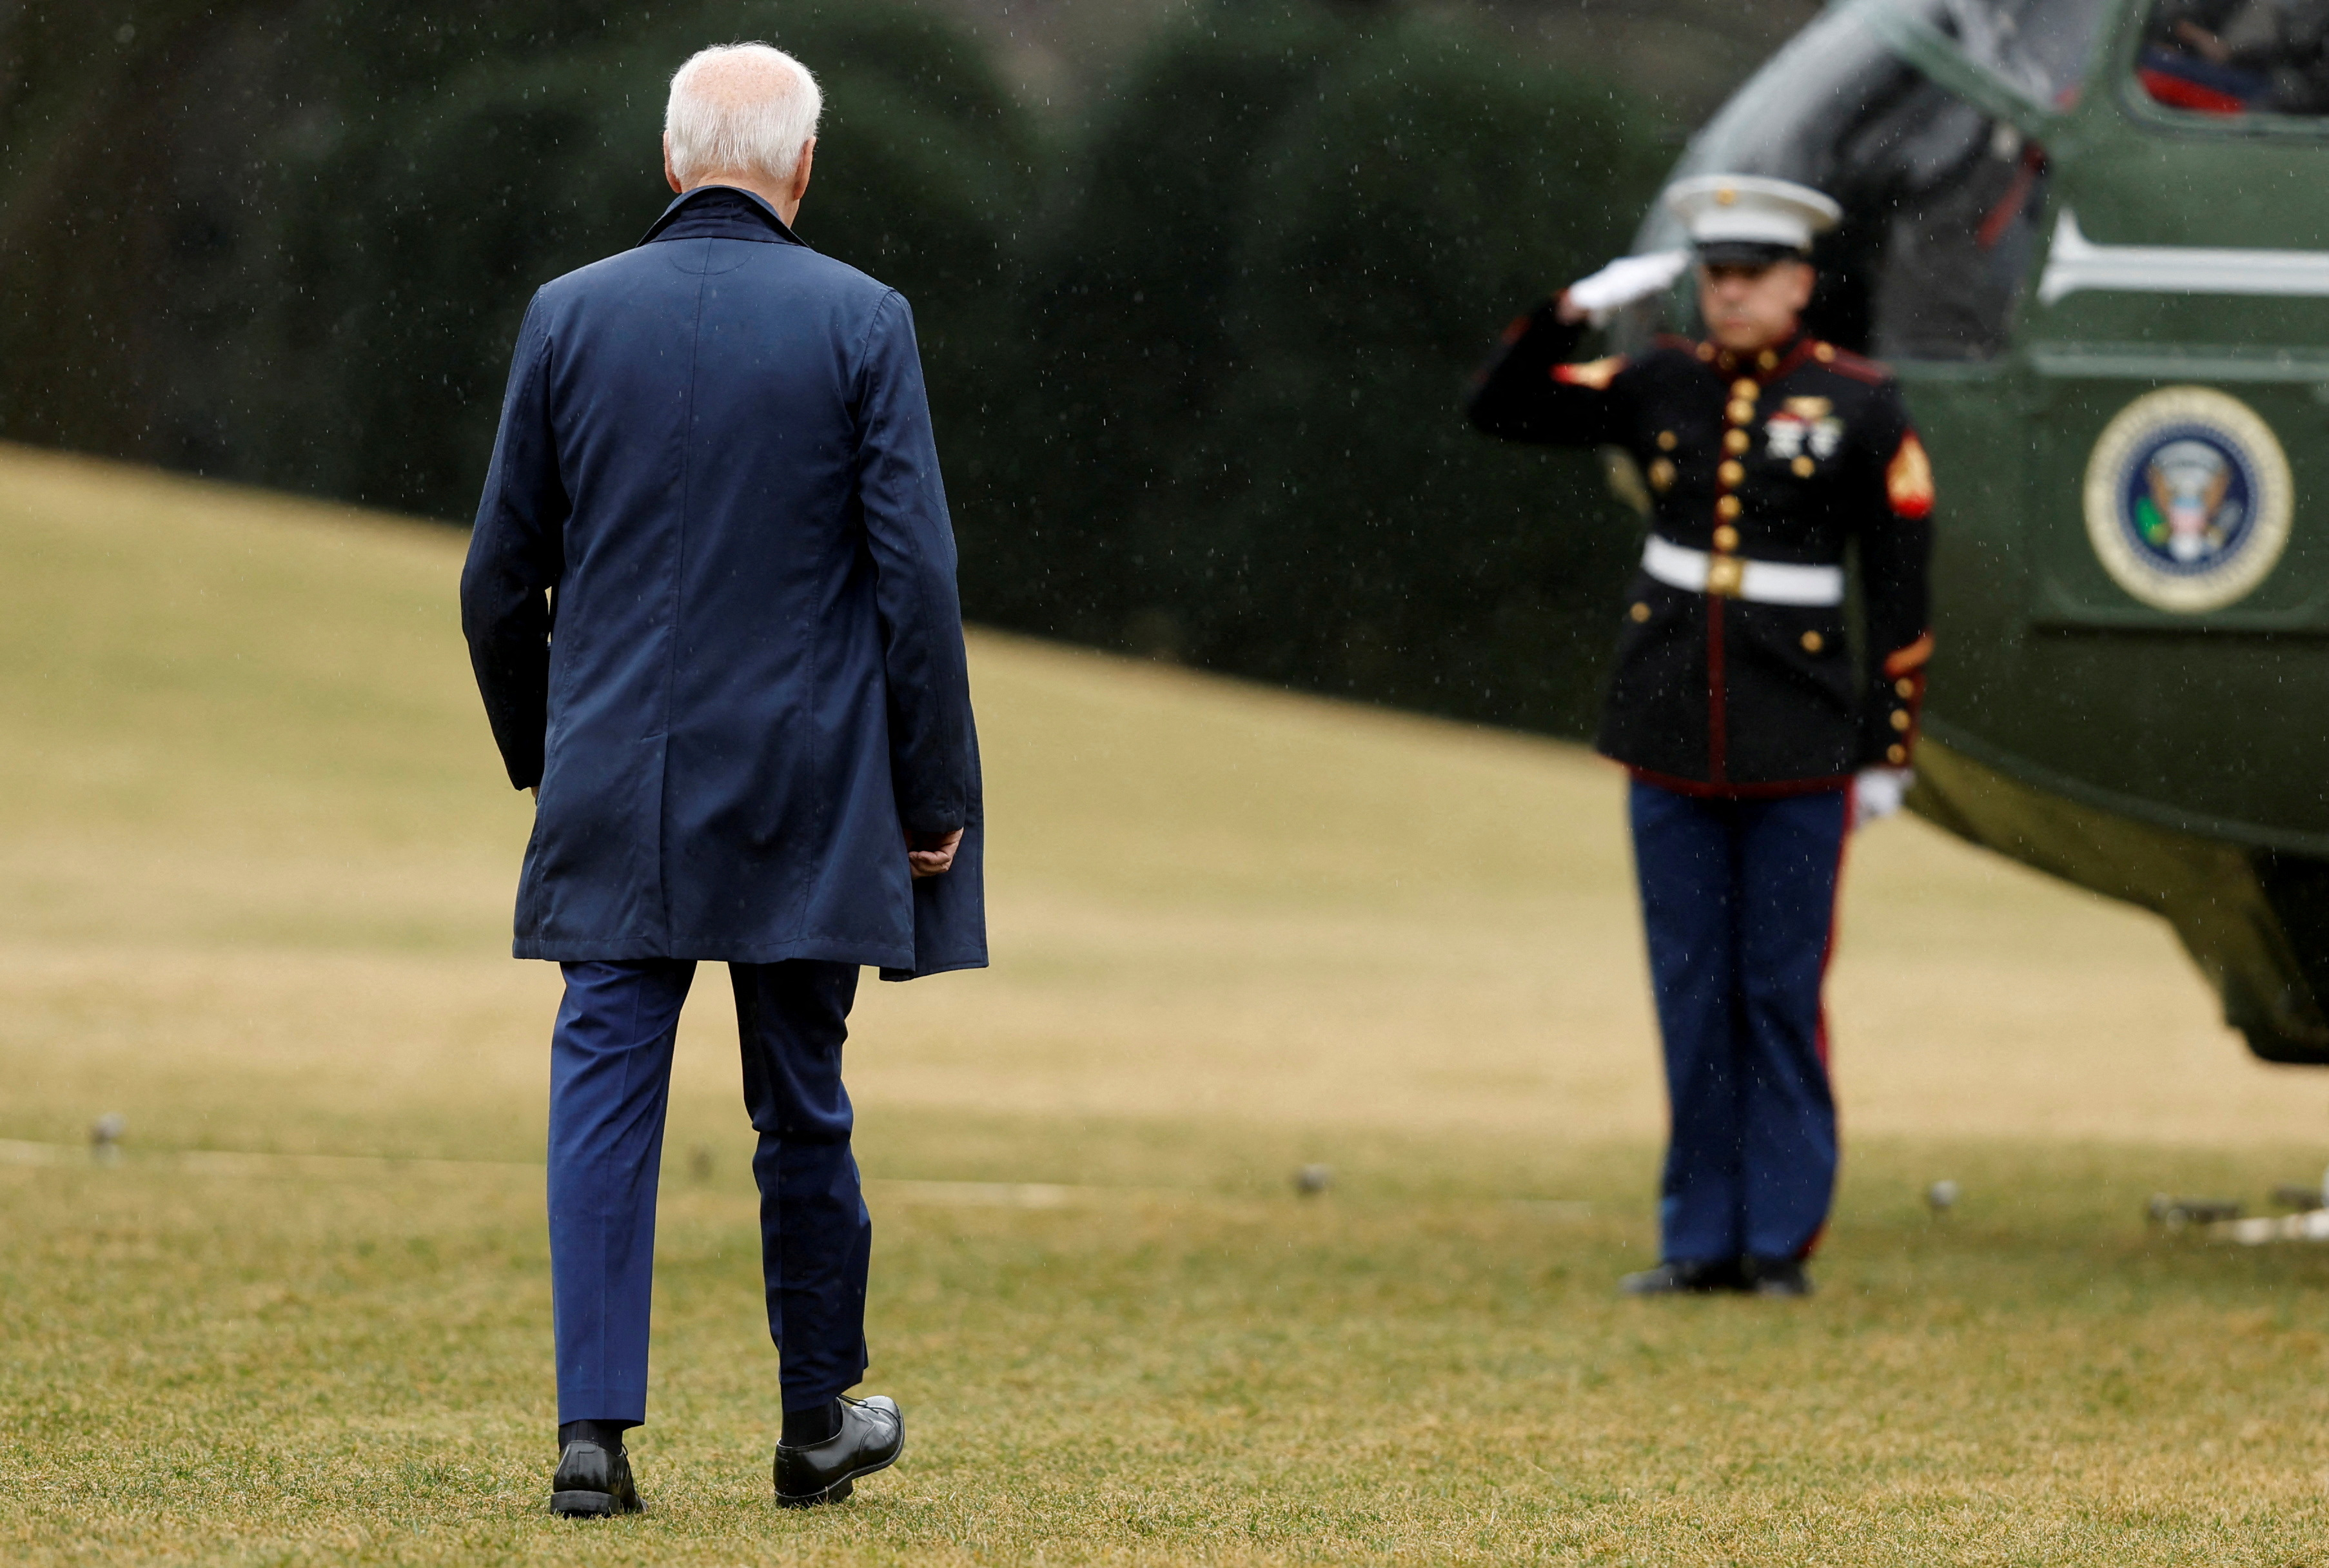 U.S. President Biden departs for travel to New York from the White House in Washington